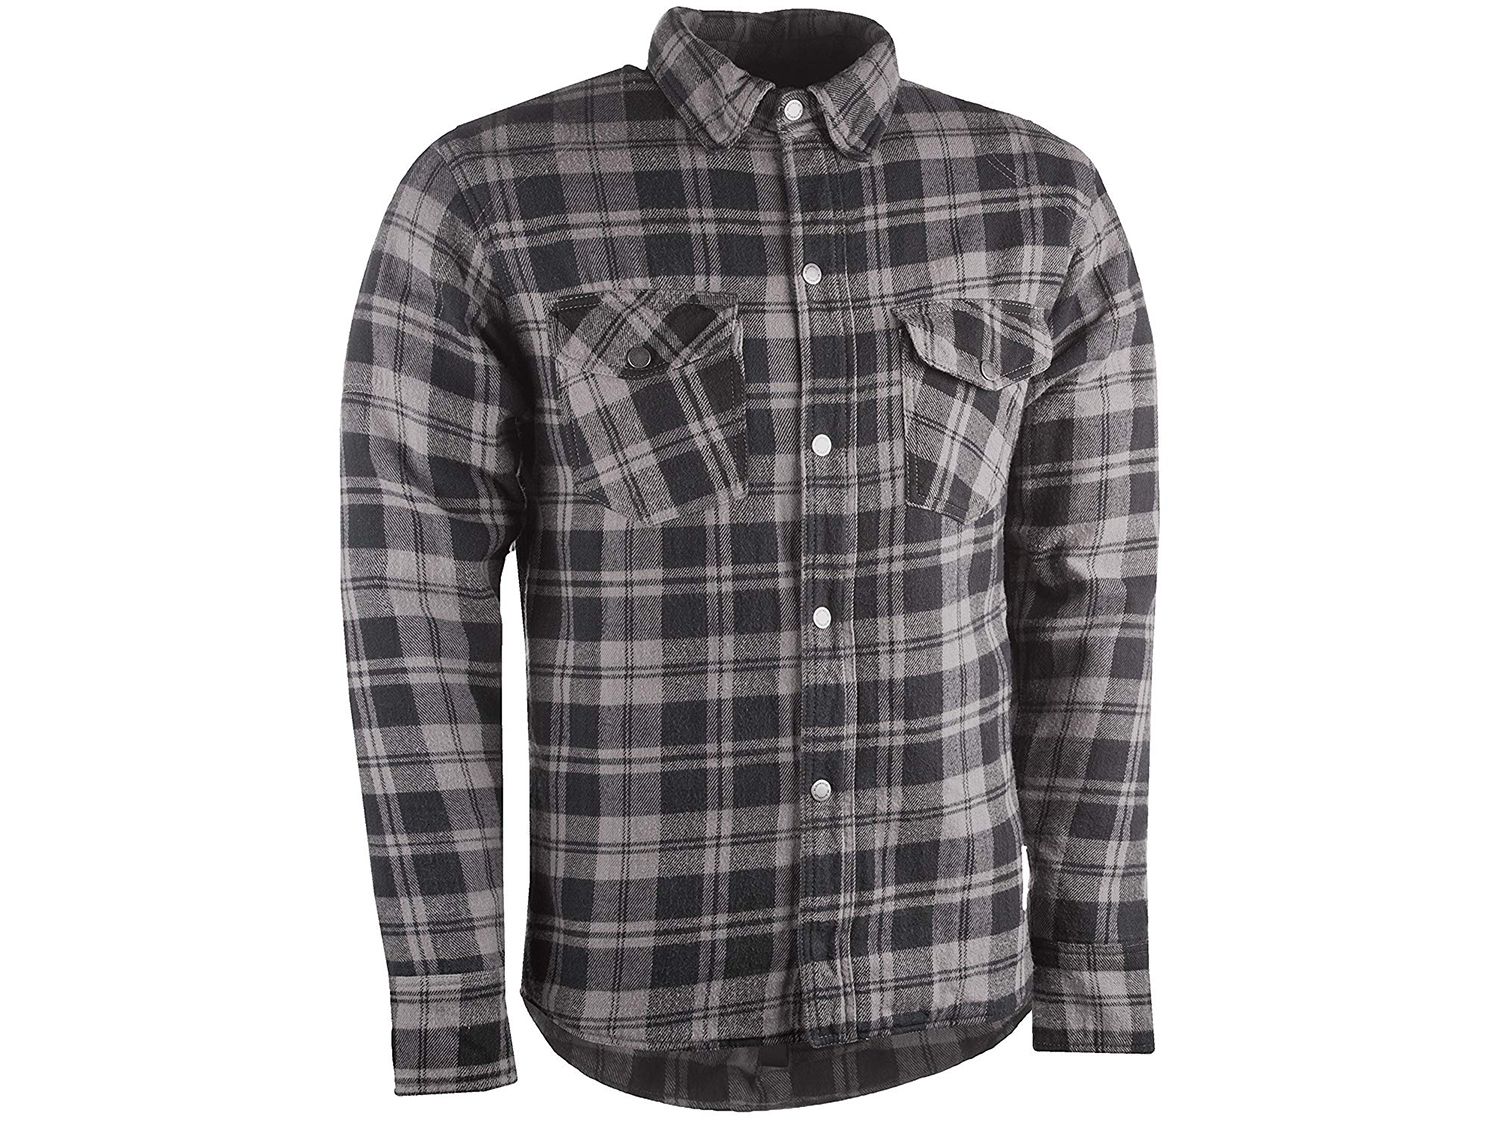 5 Full-Featured Flannels For Motorcycle Riding | Motorcycle Cruiser